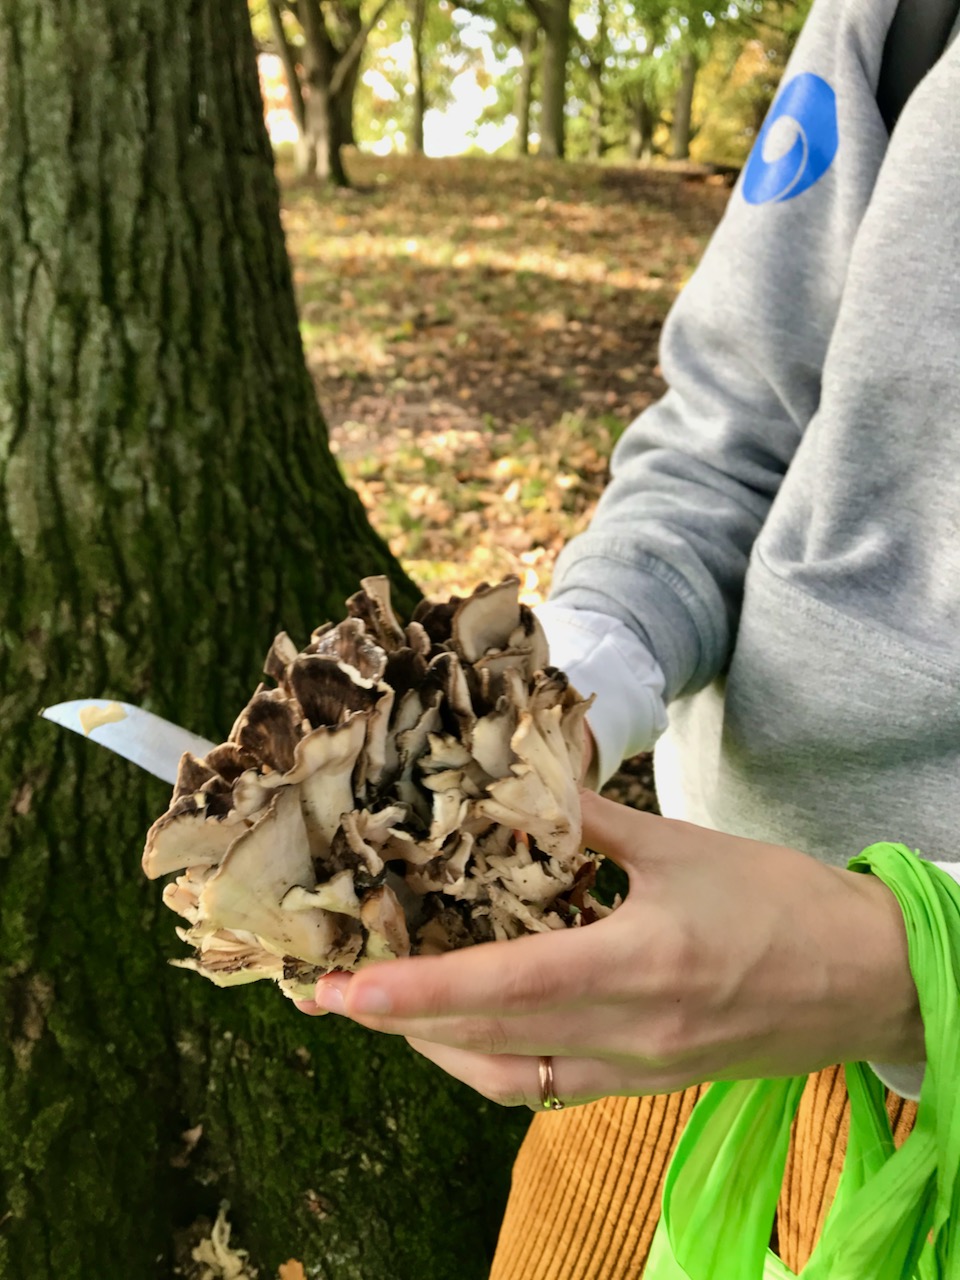 Maria holding the hen of the woods fungus that we found in one hand and a small knife in the other.